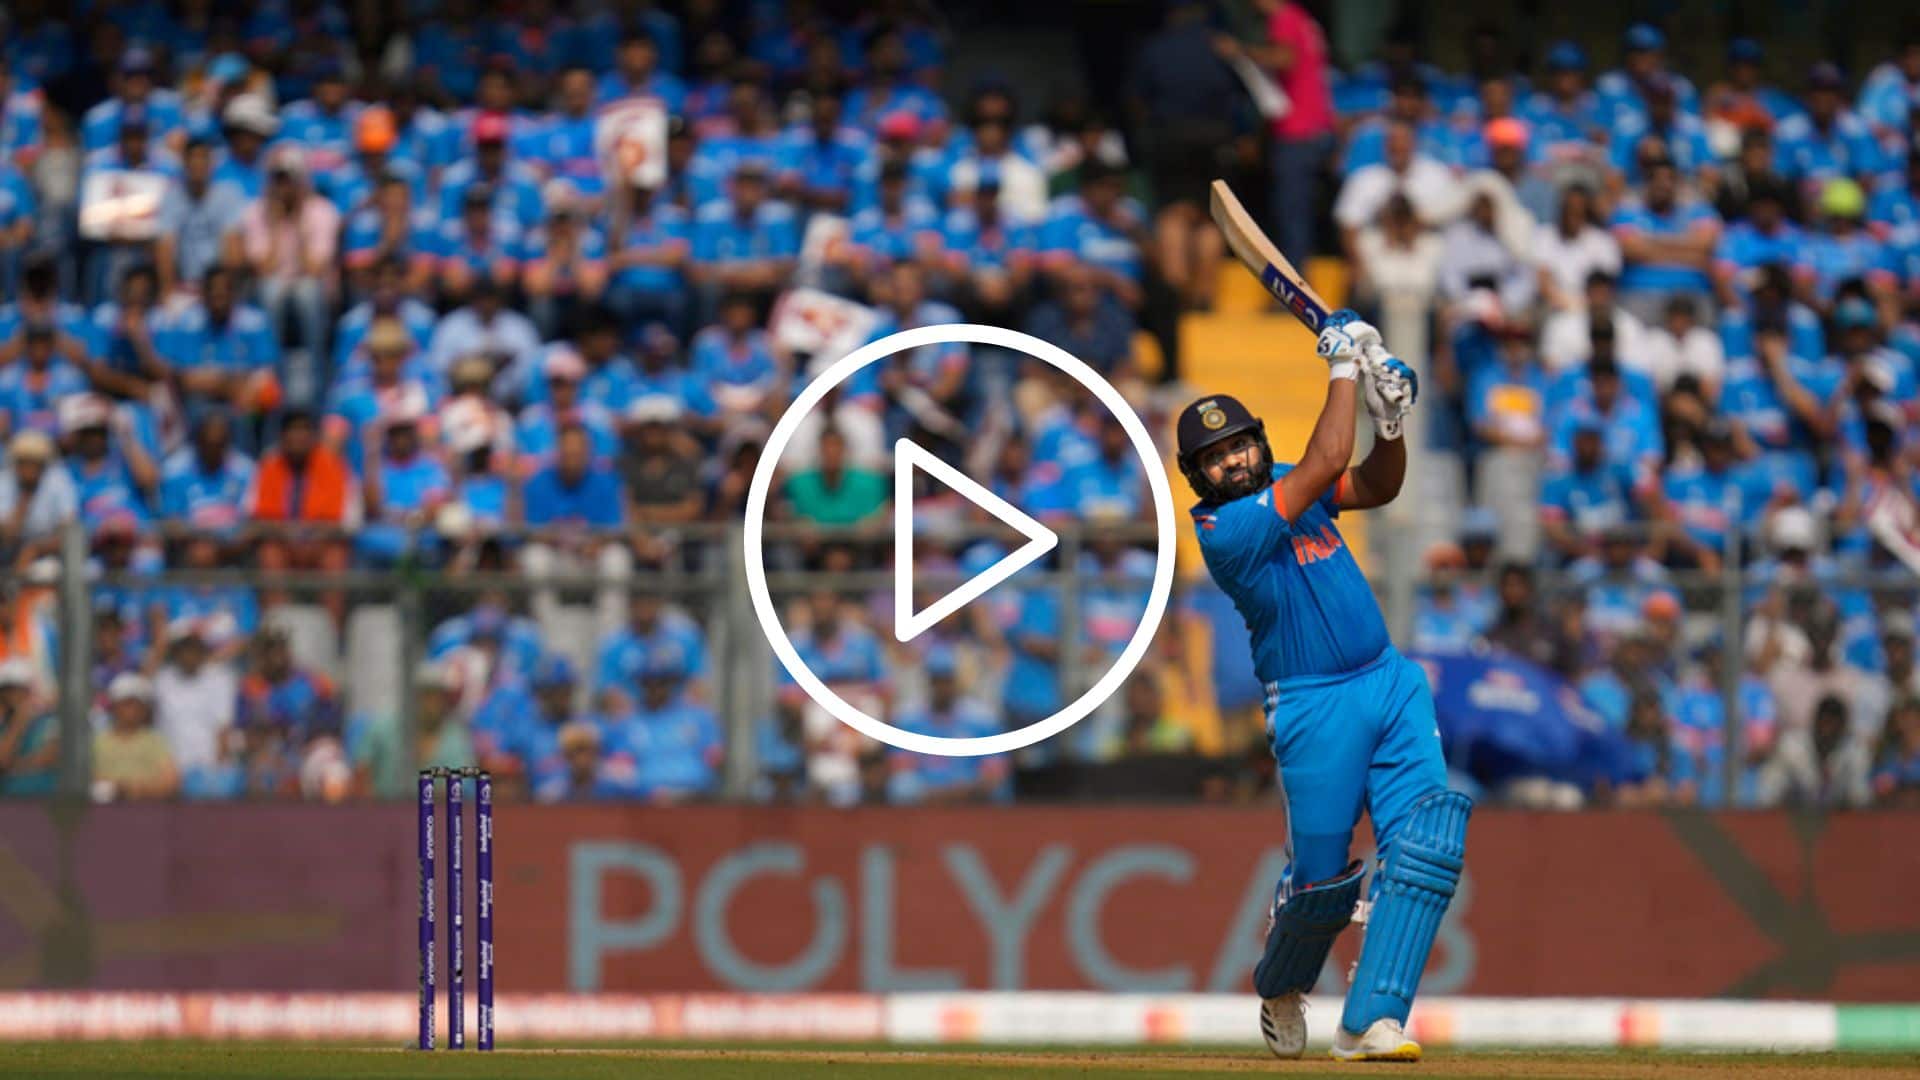 [Watch] 'Hitman' Rohit Sharma Goes Past Chris Gayle, Breaks The Record For Most Sixes In A Single World Cup